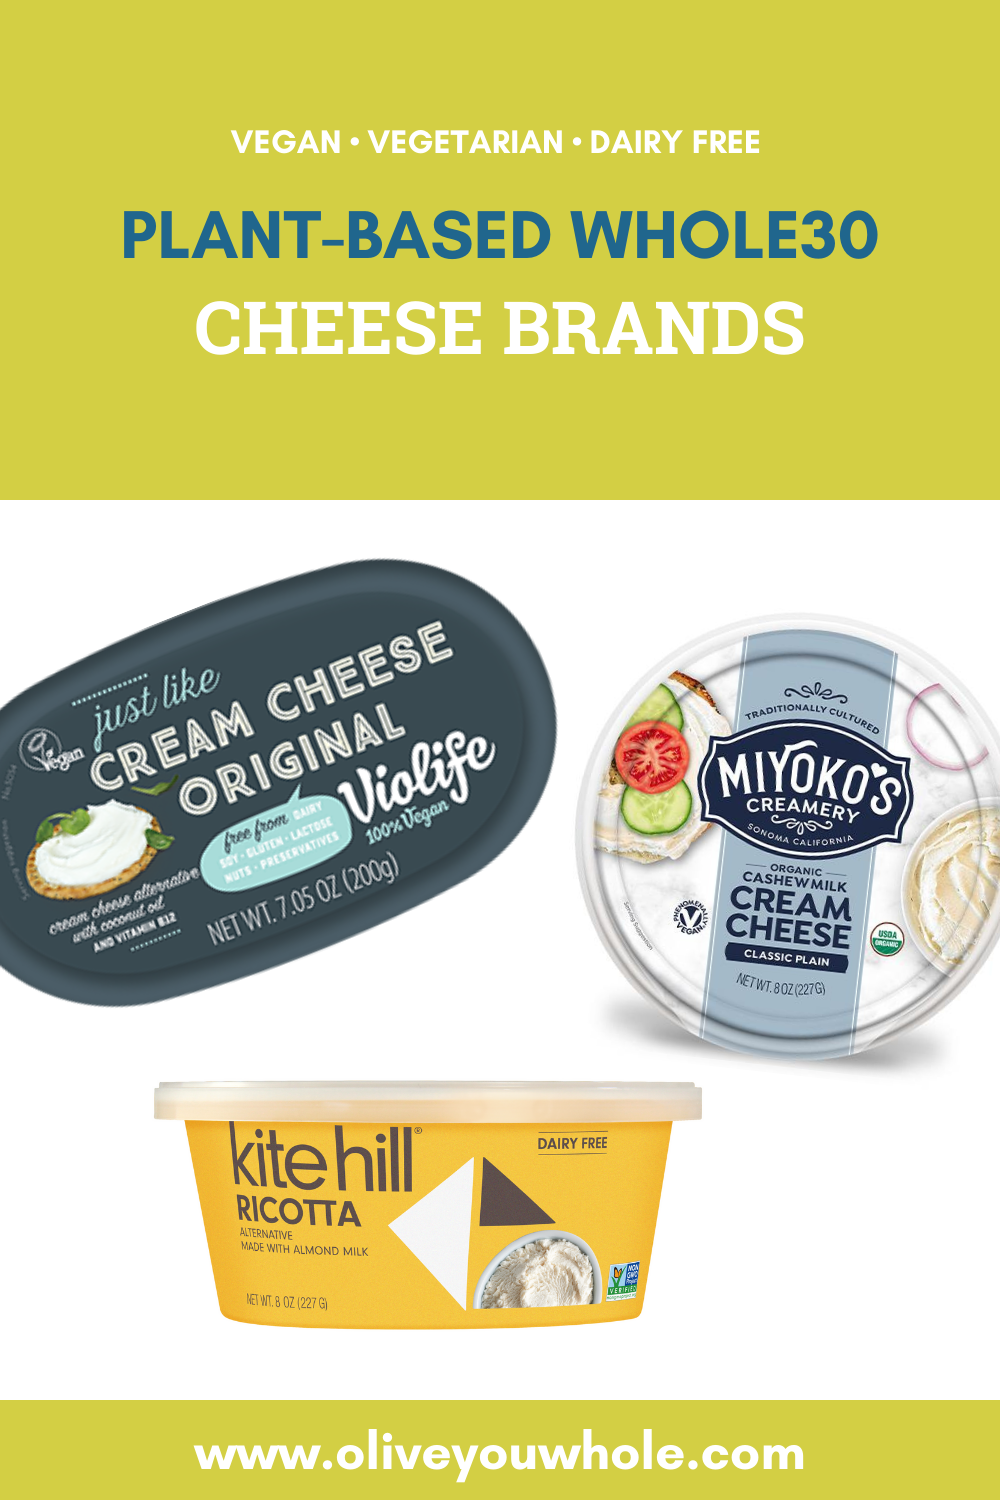 Plant-Based Whole30 Cheese Brands